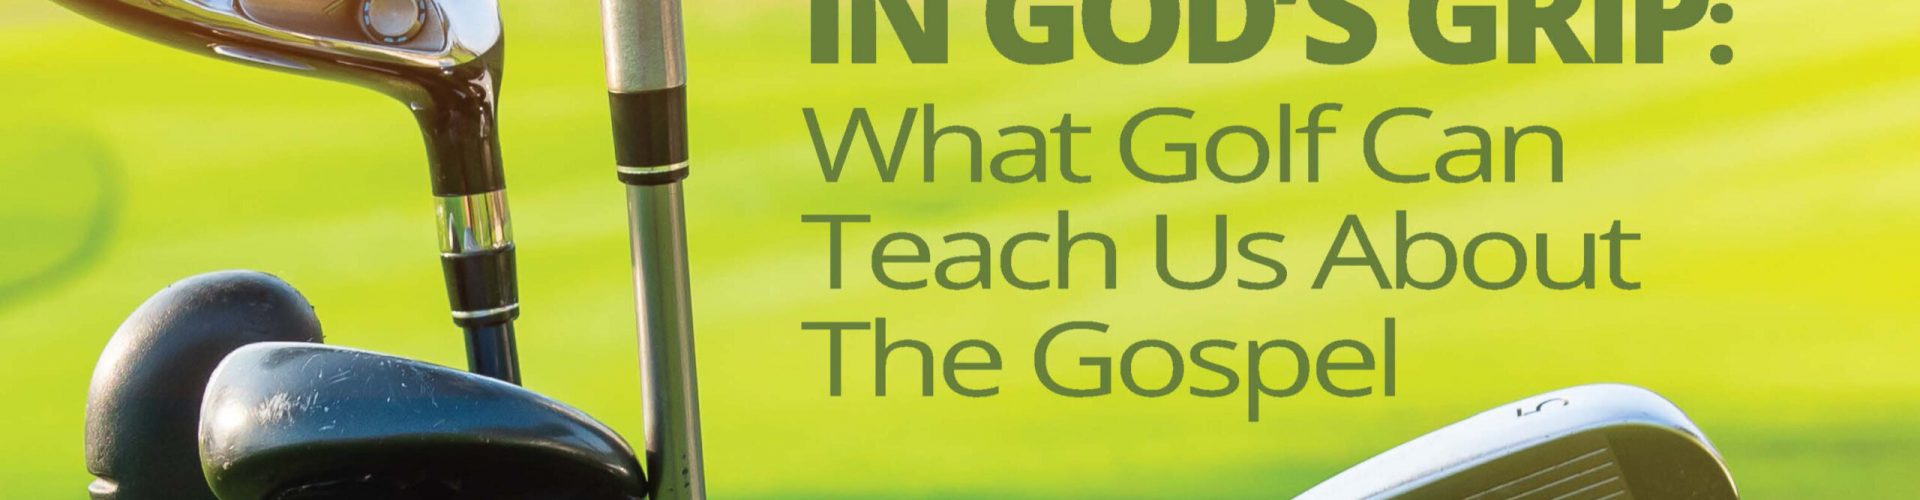 Russell Levenson – In God’s Grip: What golf can teach us about the Gospel